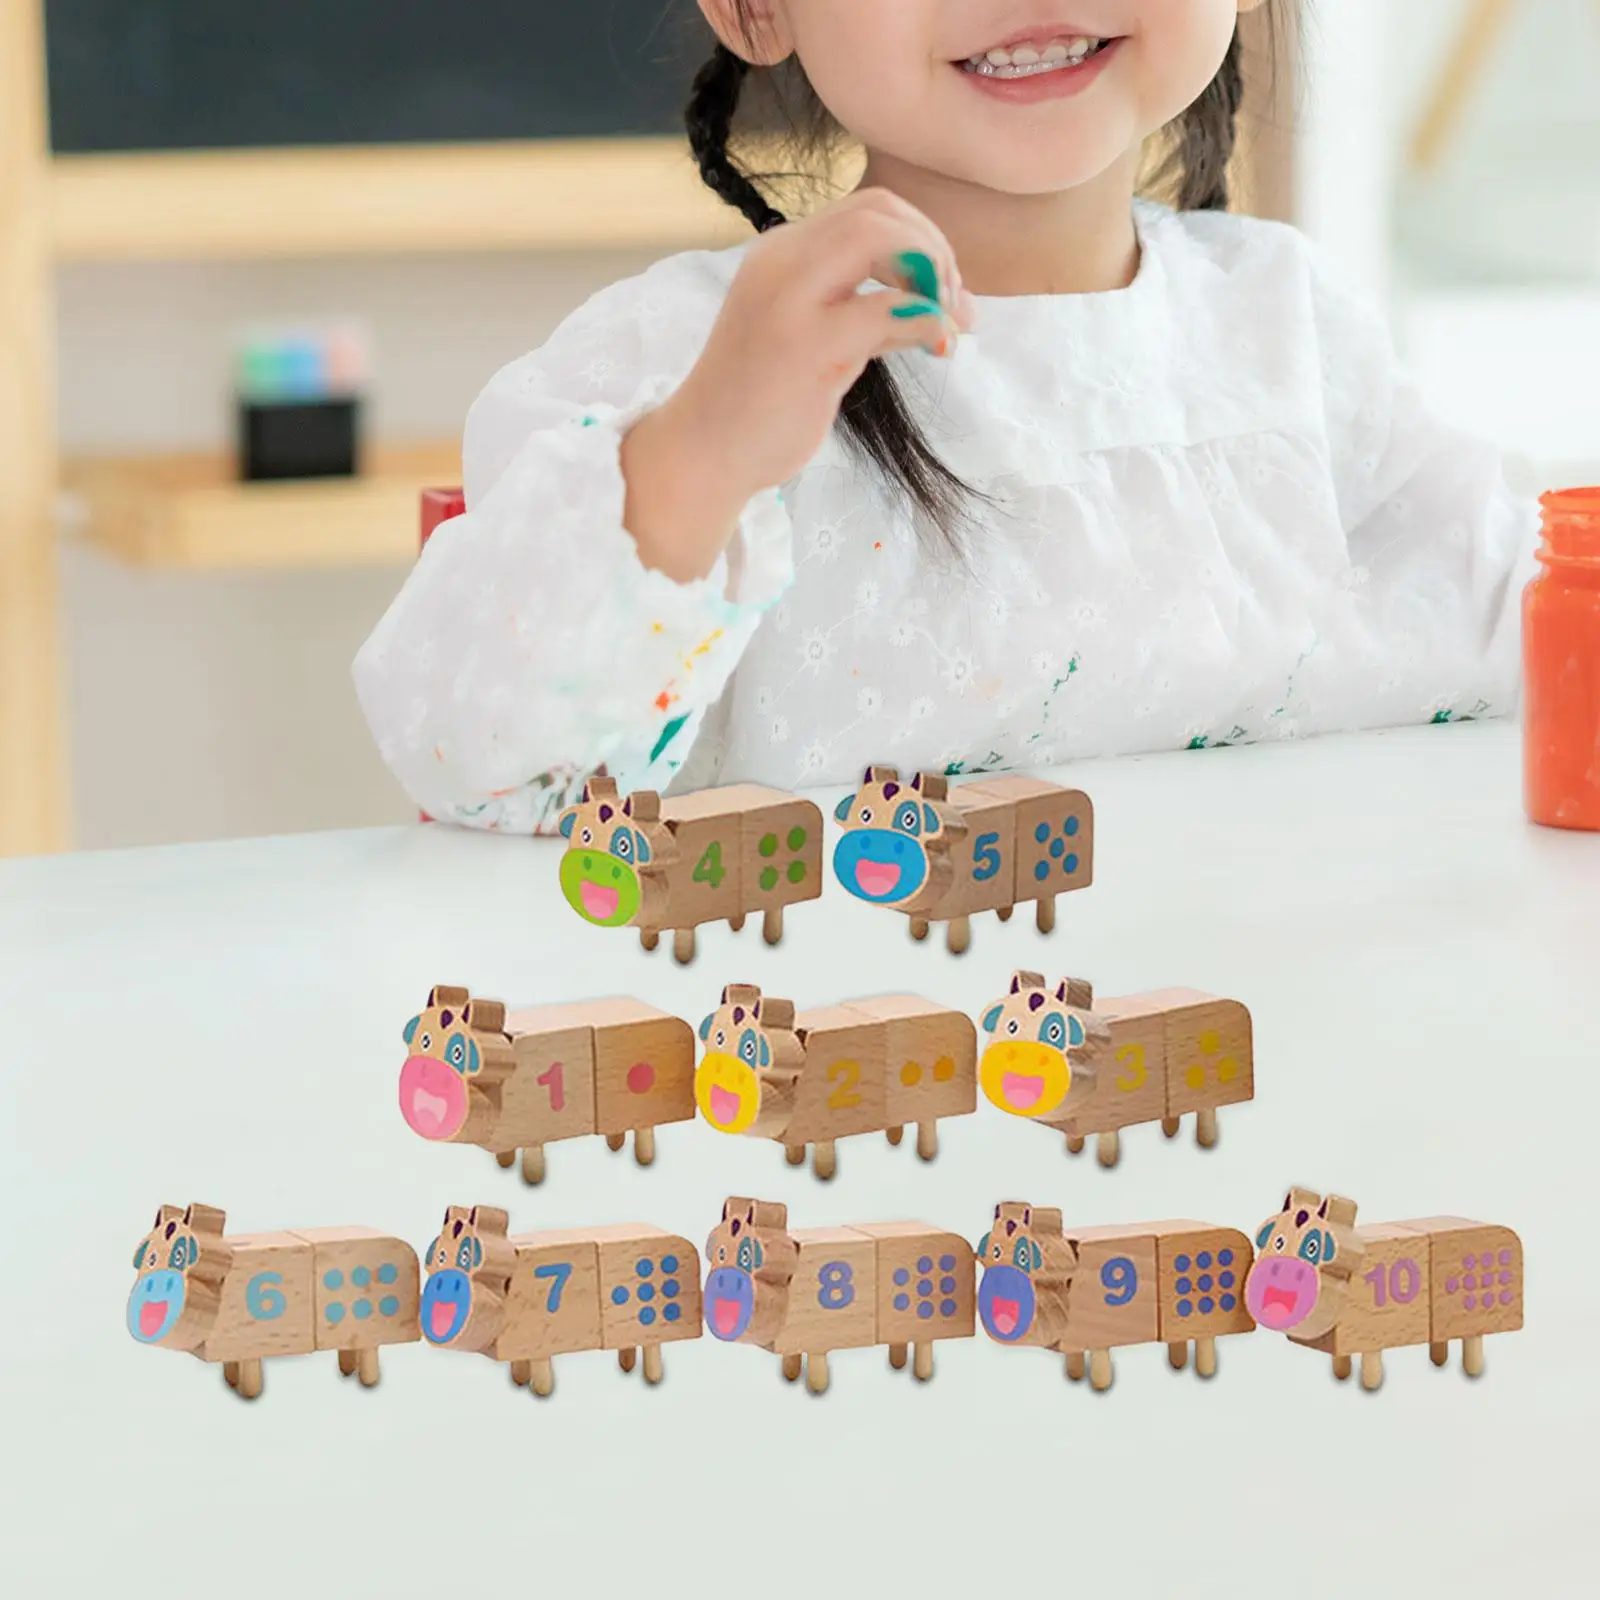 10 Pieces Wooden Building Blocks Preschool Learning Activities Colored Alphabet Number Stacking Blocks for Girls Holiday Gifts